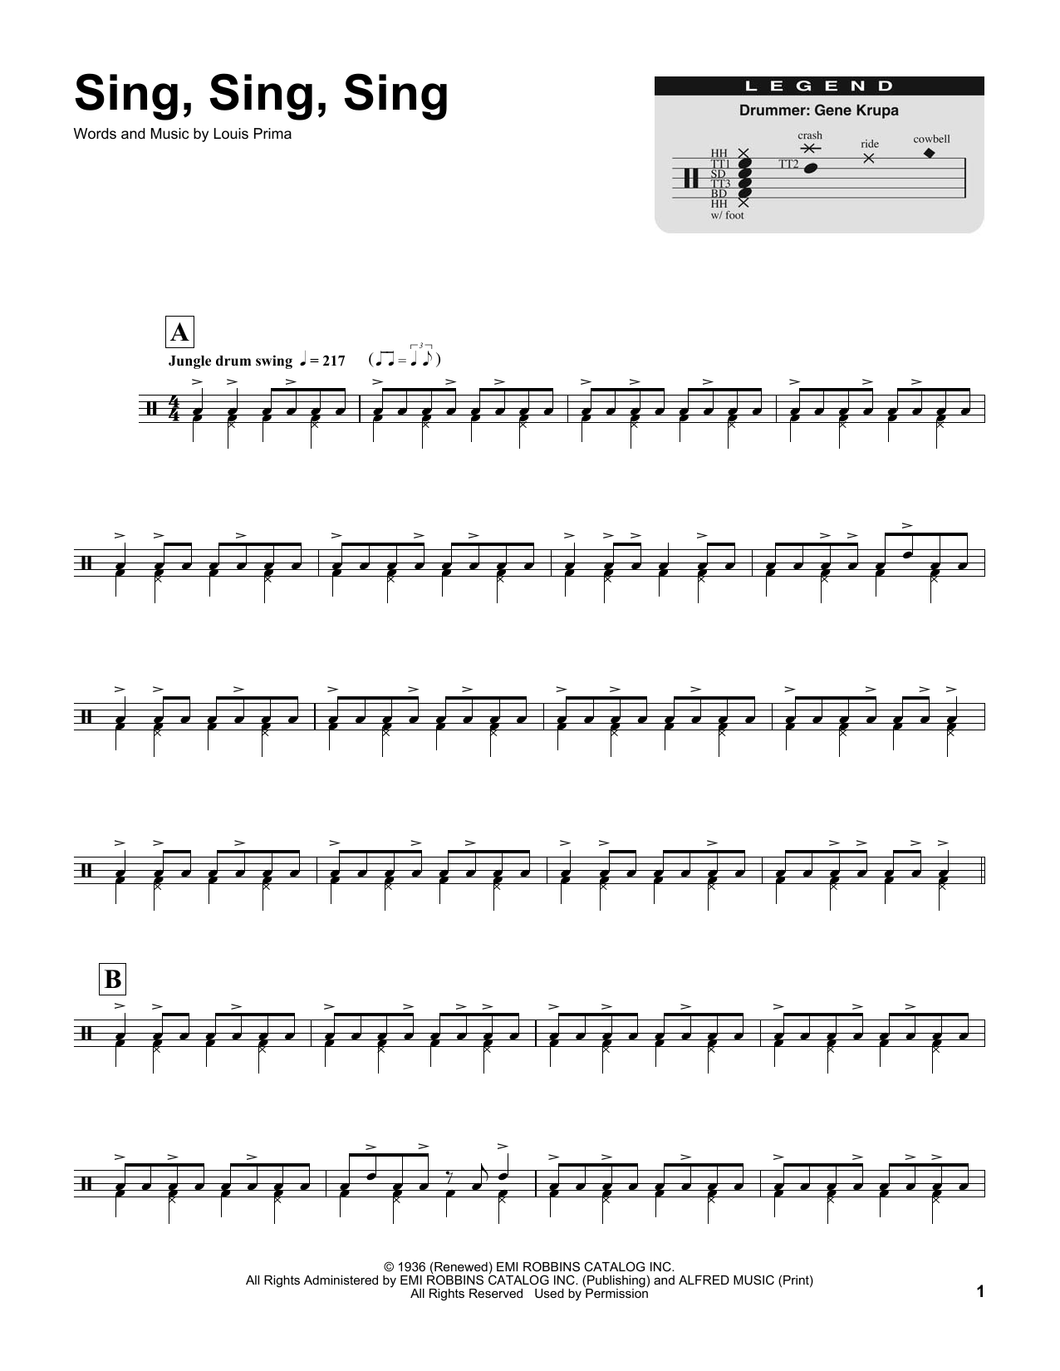 Sing, Sing, Sing - Benny Goodman and His Orchestra - Full Drum Transcription / Drum Sheet Music - SheetMusicDirect DT195444